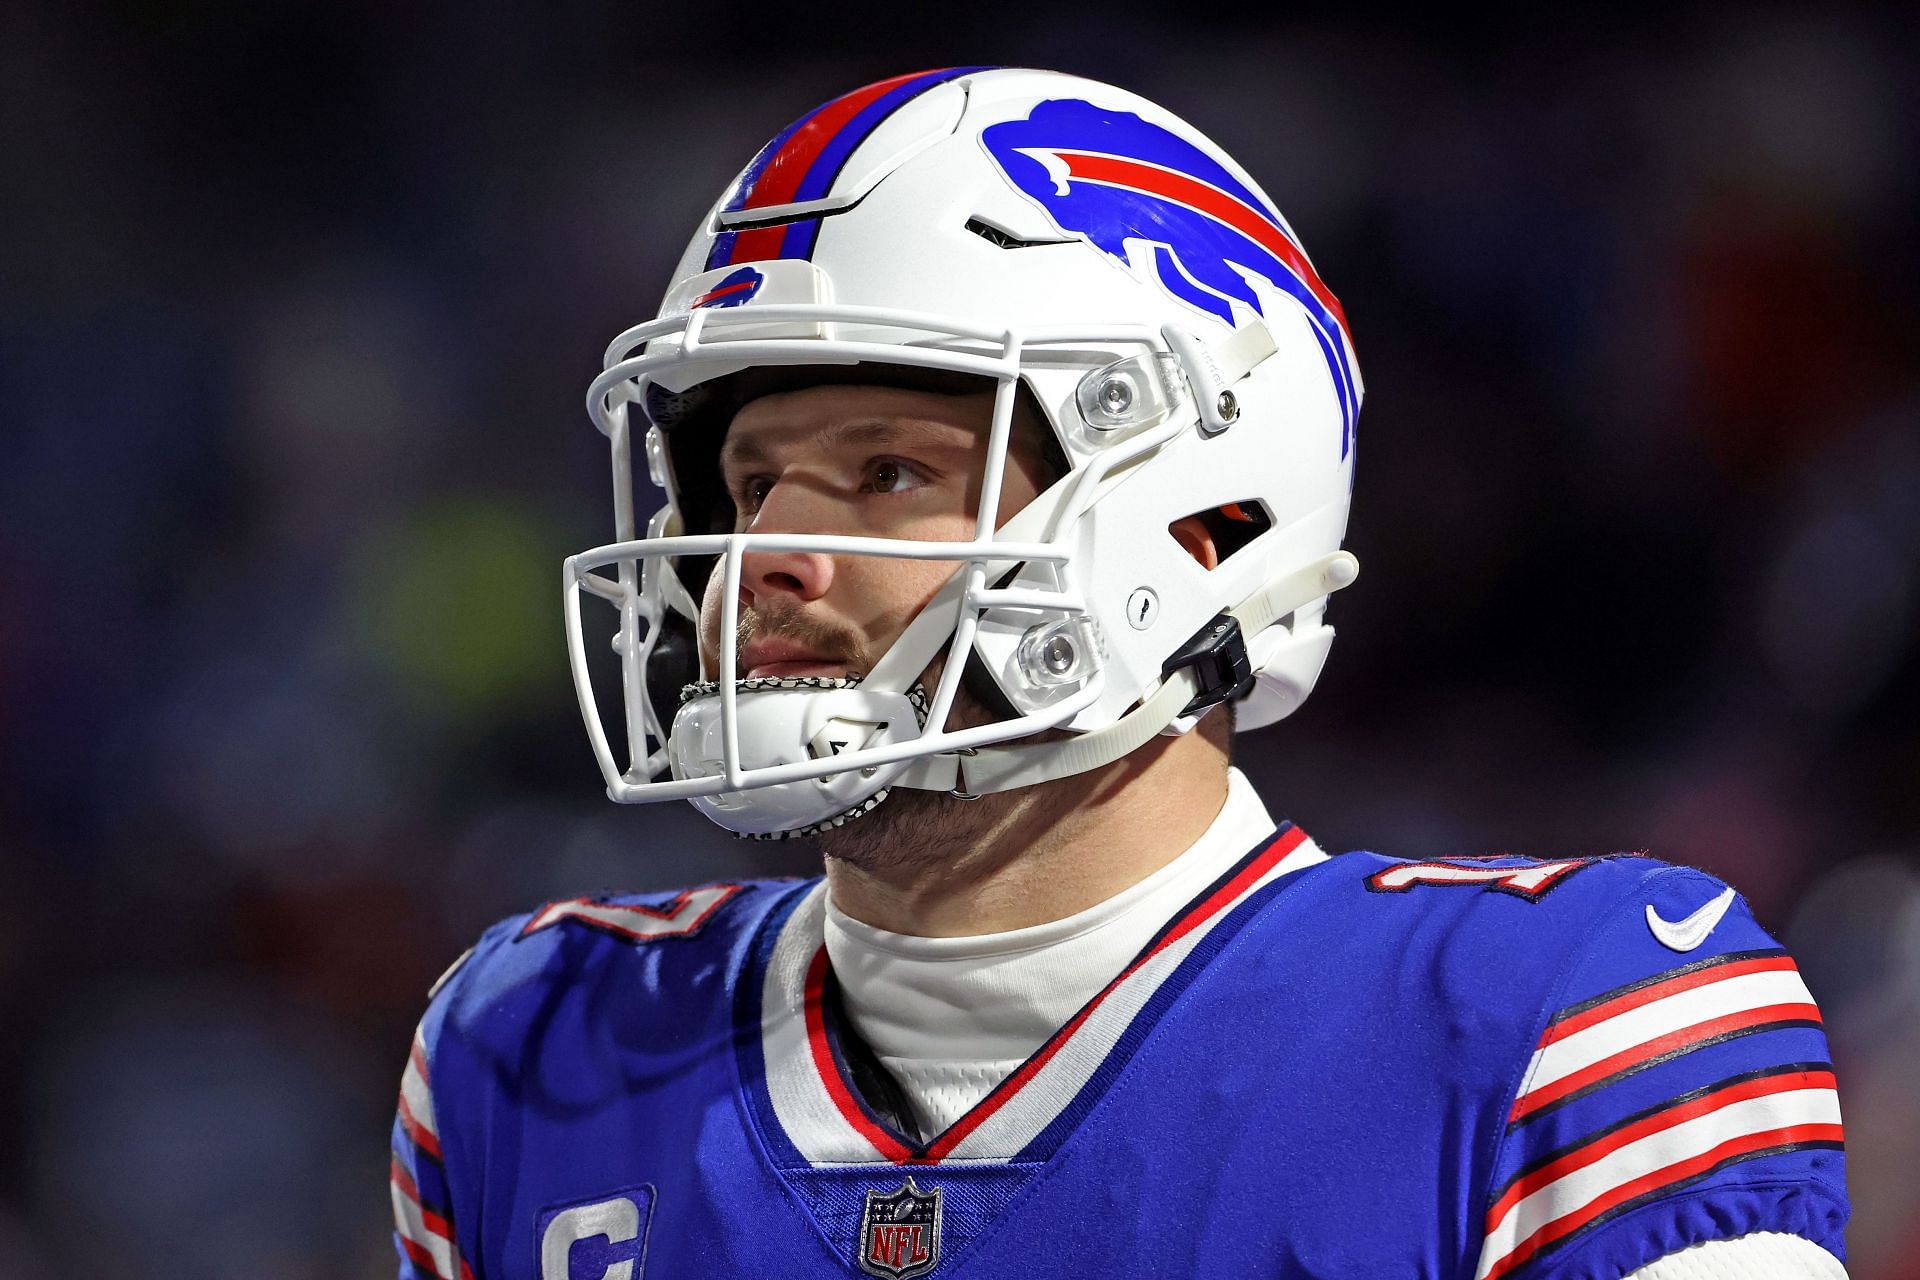 Bills quarterback Josh Allen shared his thoughts about the mass shooting